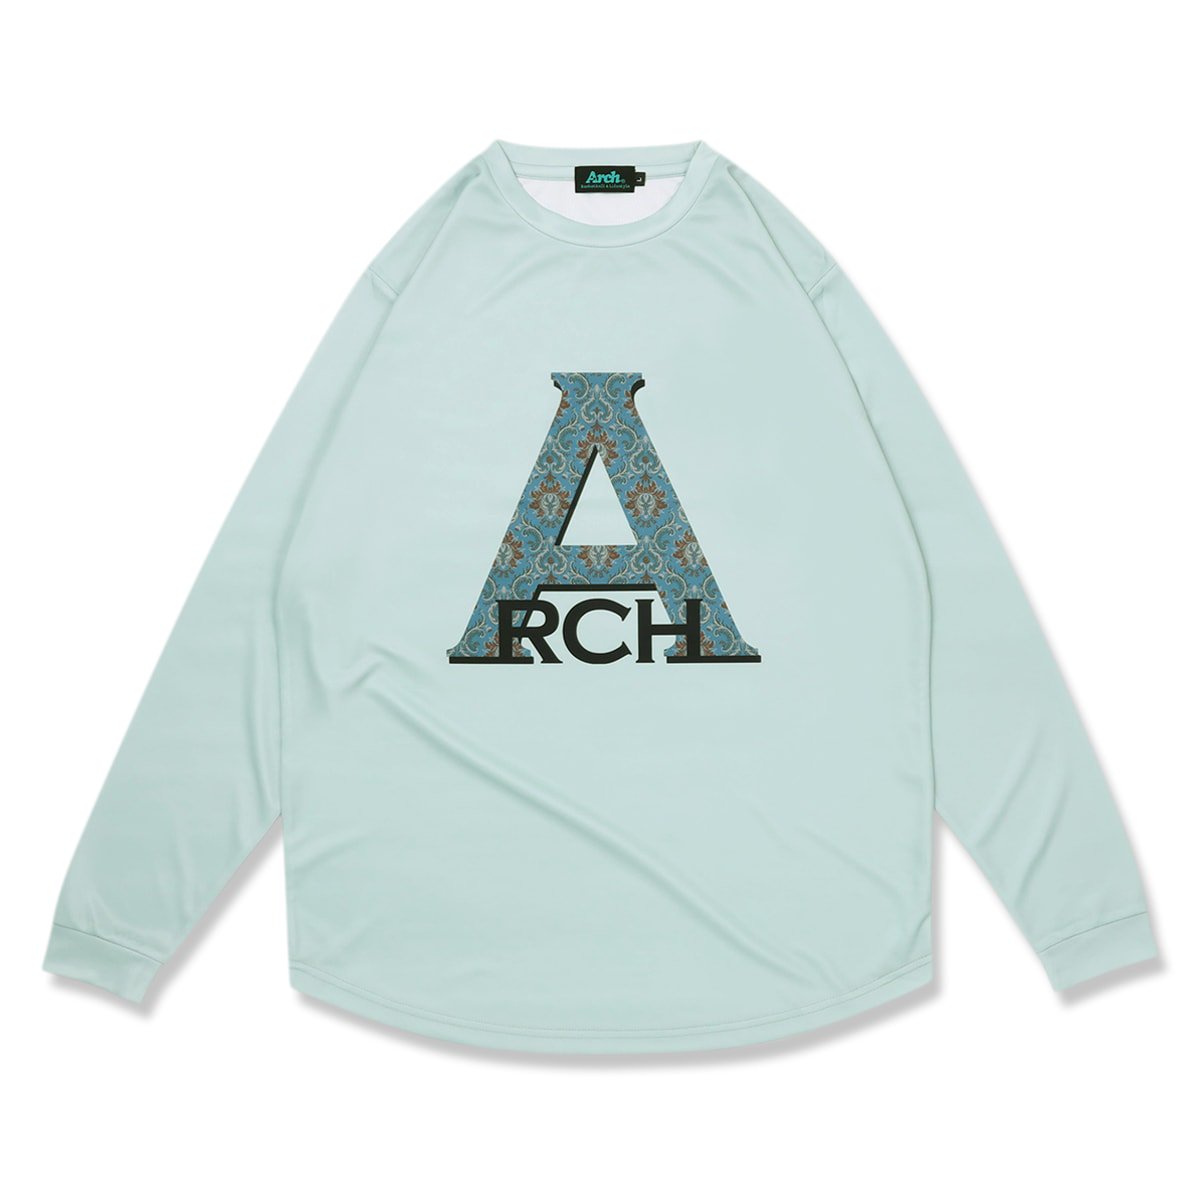 damask lettered L/S tee [DRY]【sky gray】 - Arch ☆ アーチ